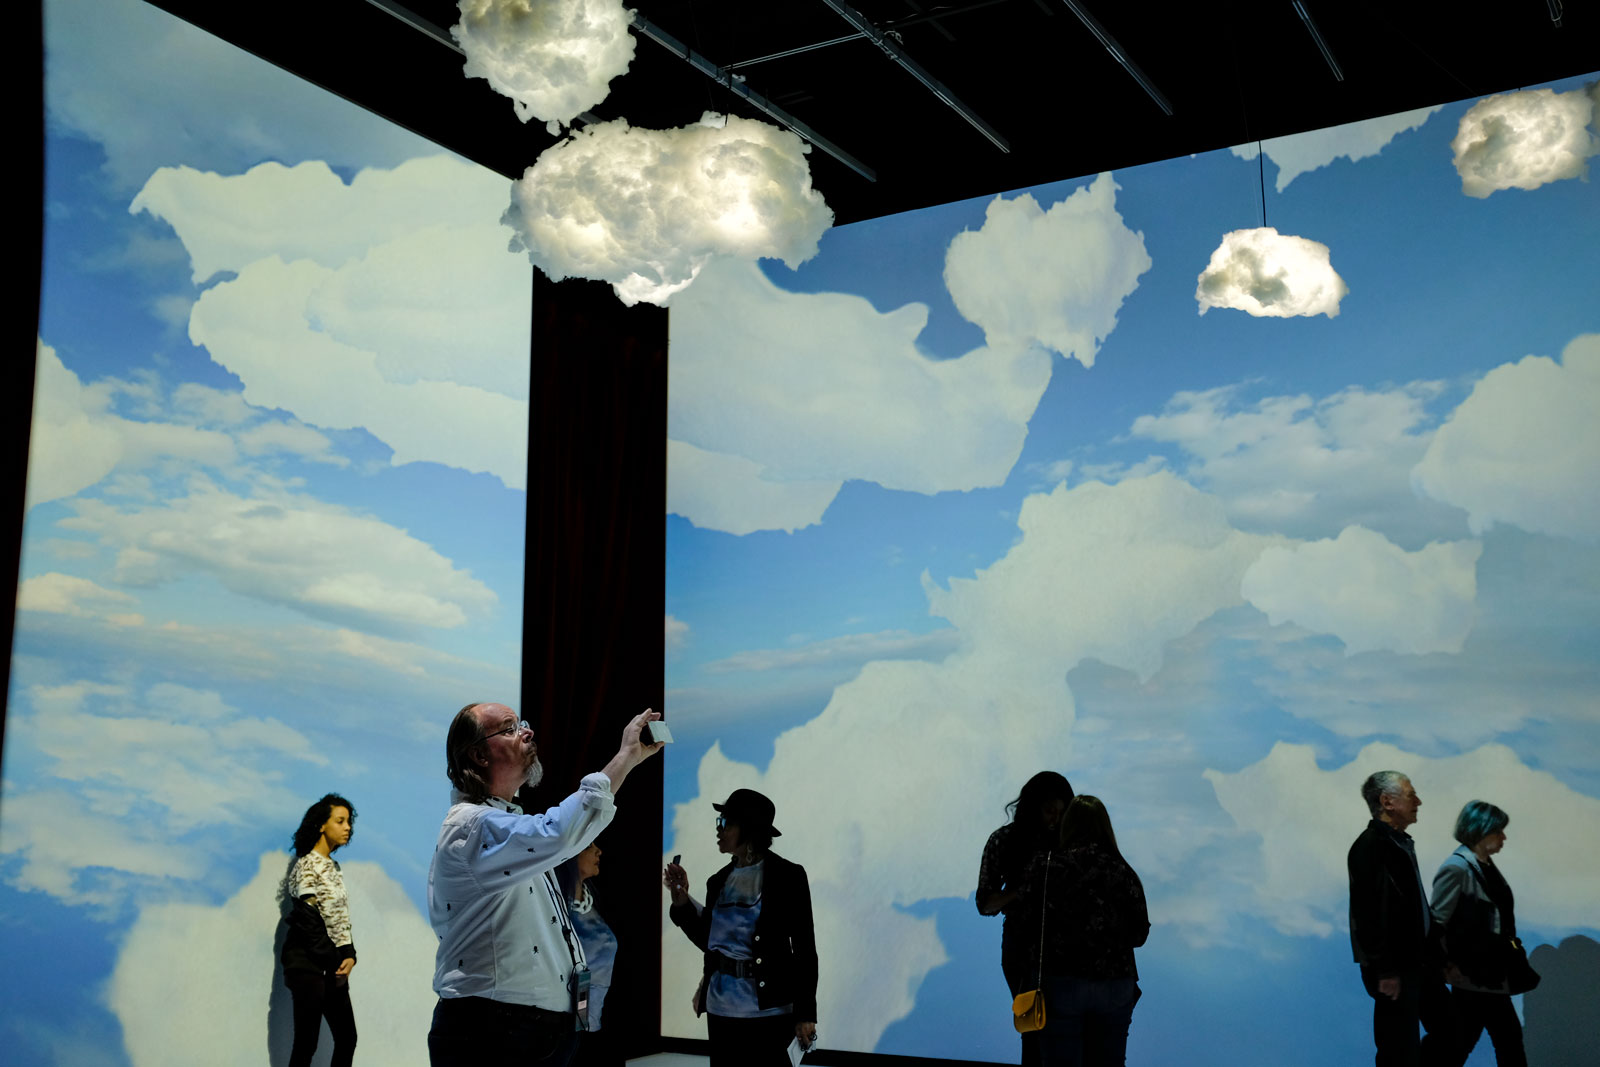 A Cloud Room at the Dali Museum in St. Petersburg